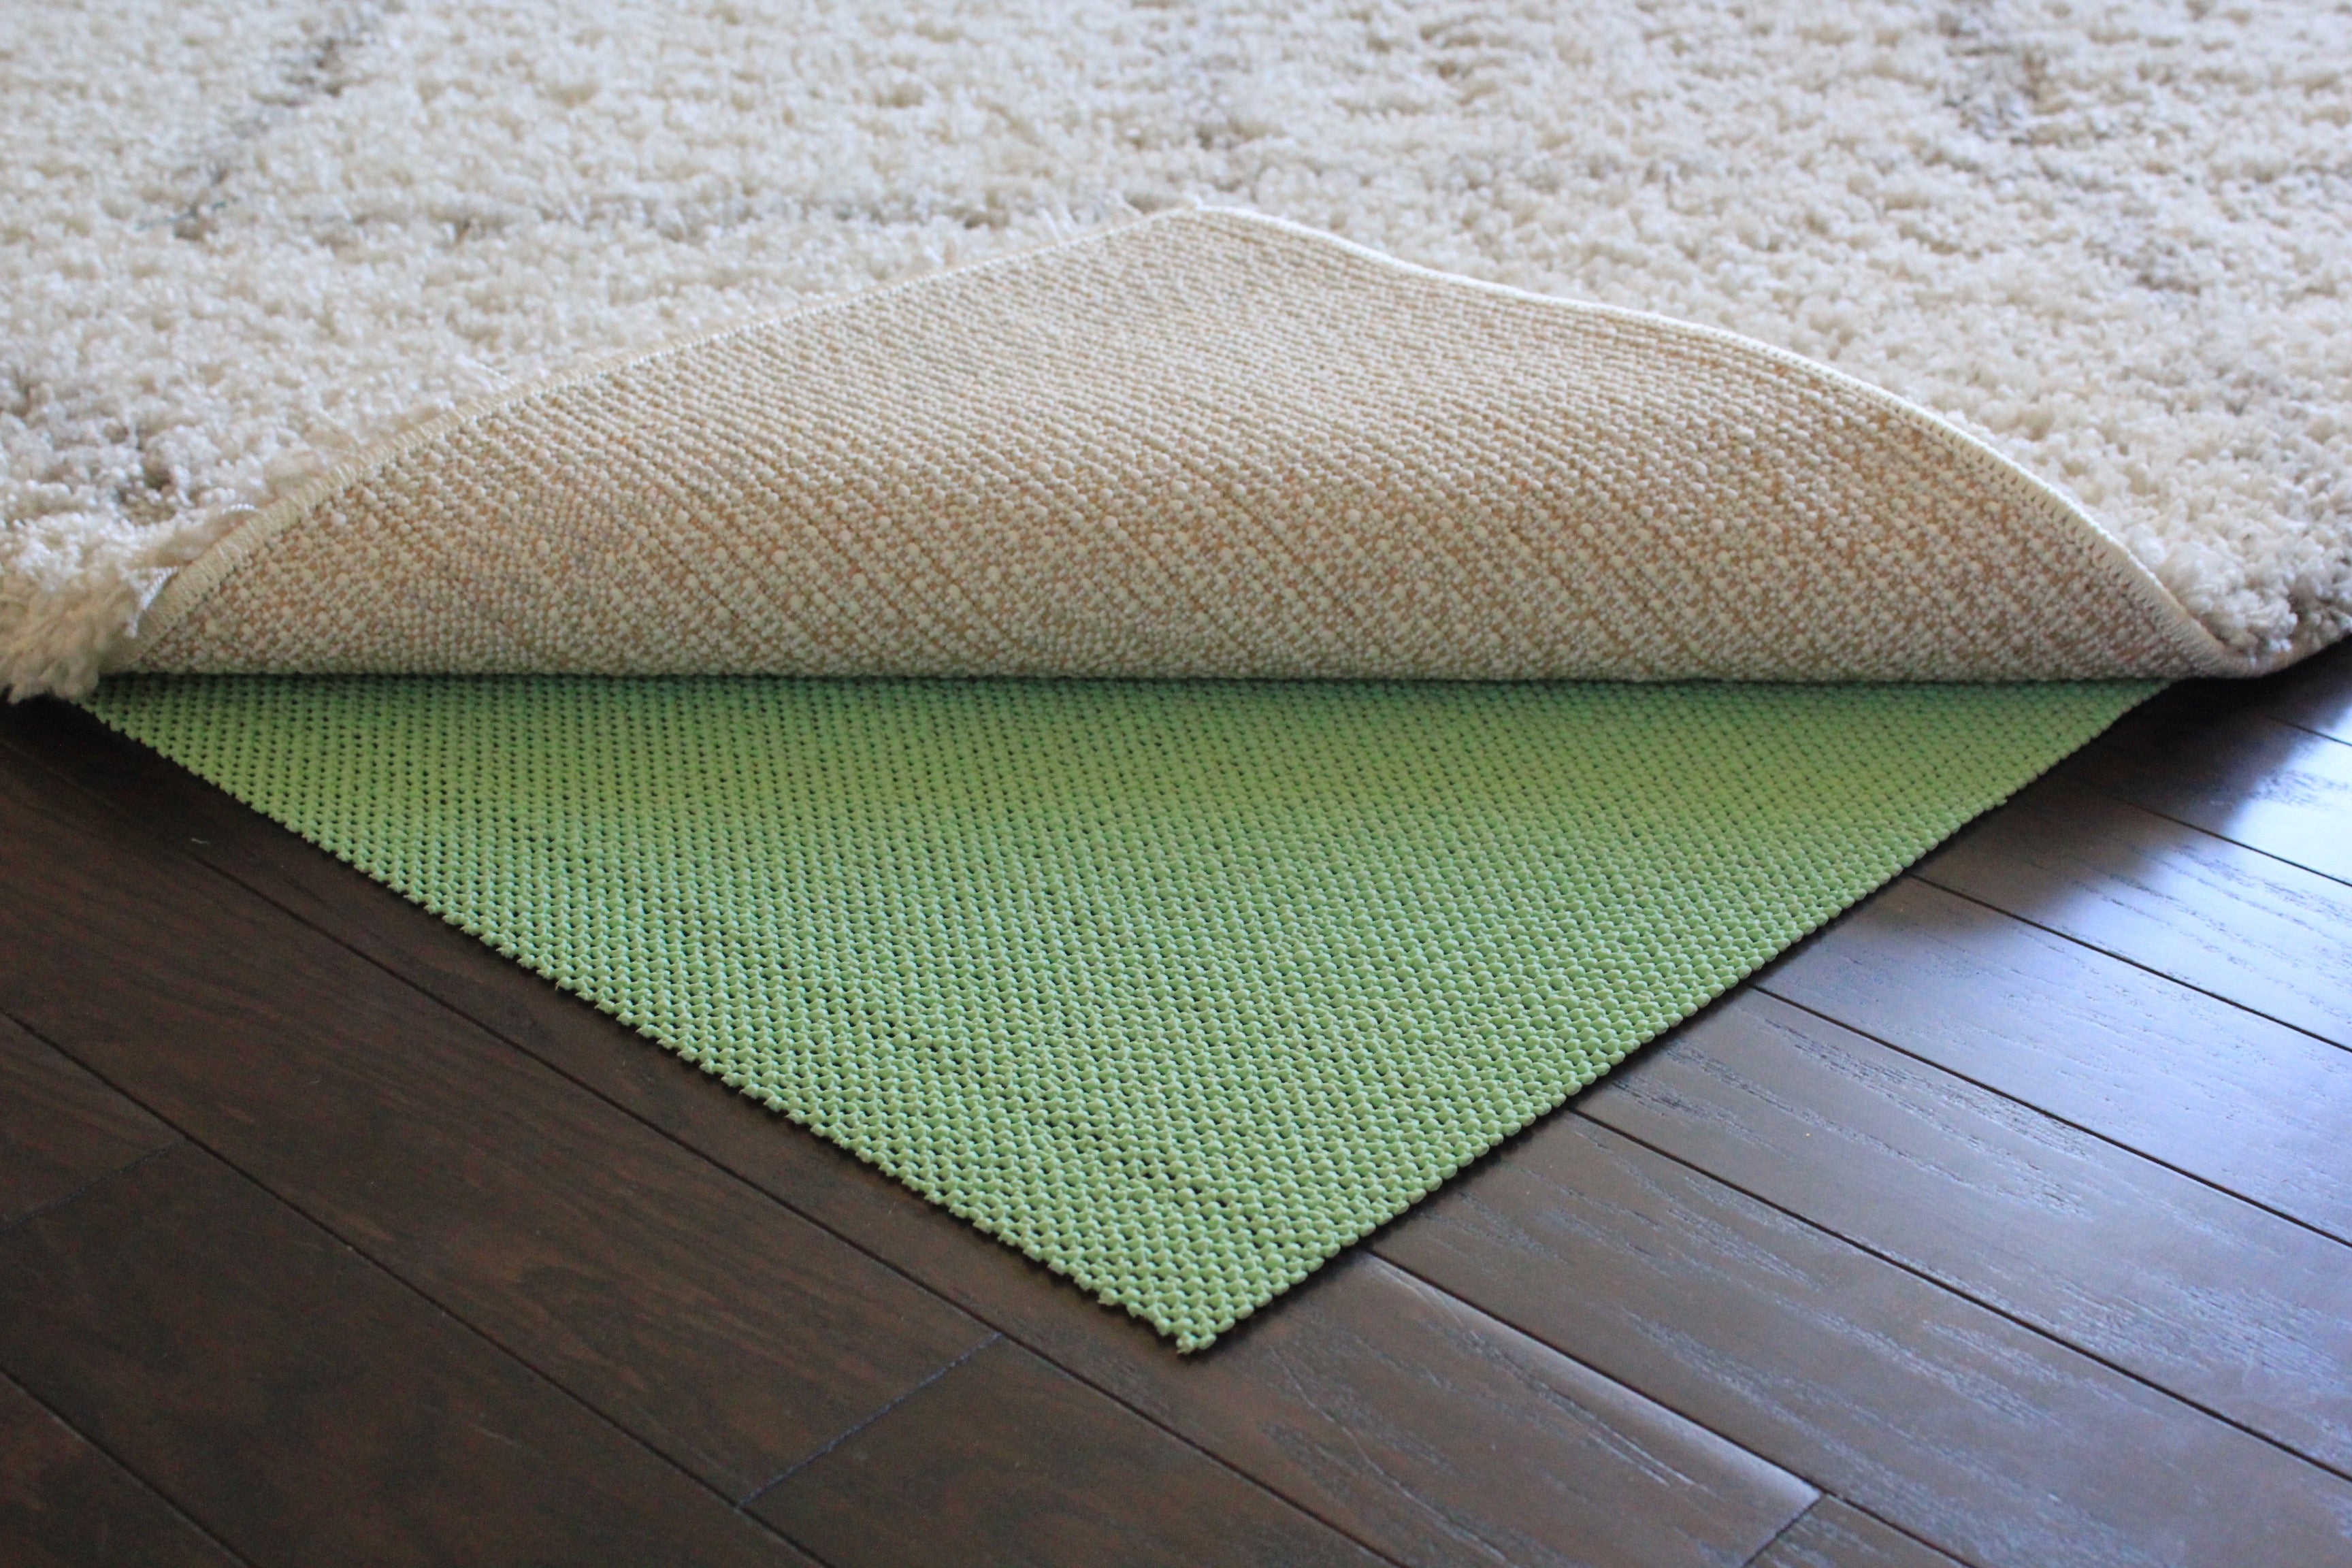 Why Buy an Area Rug Pad